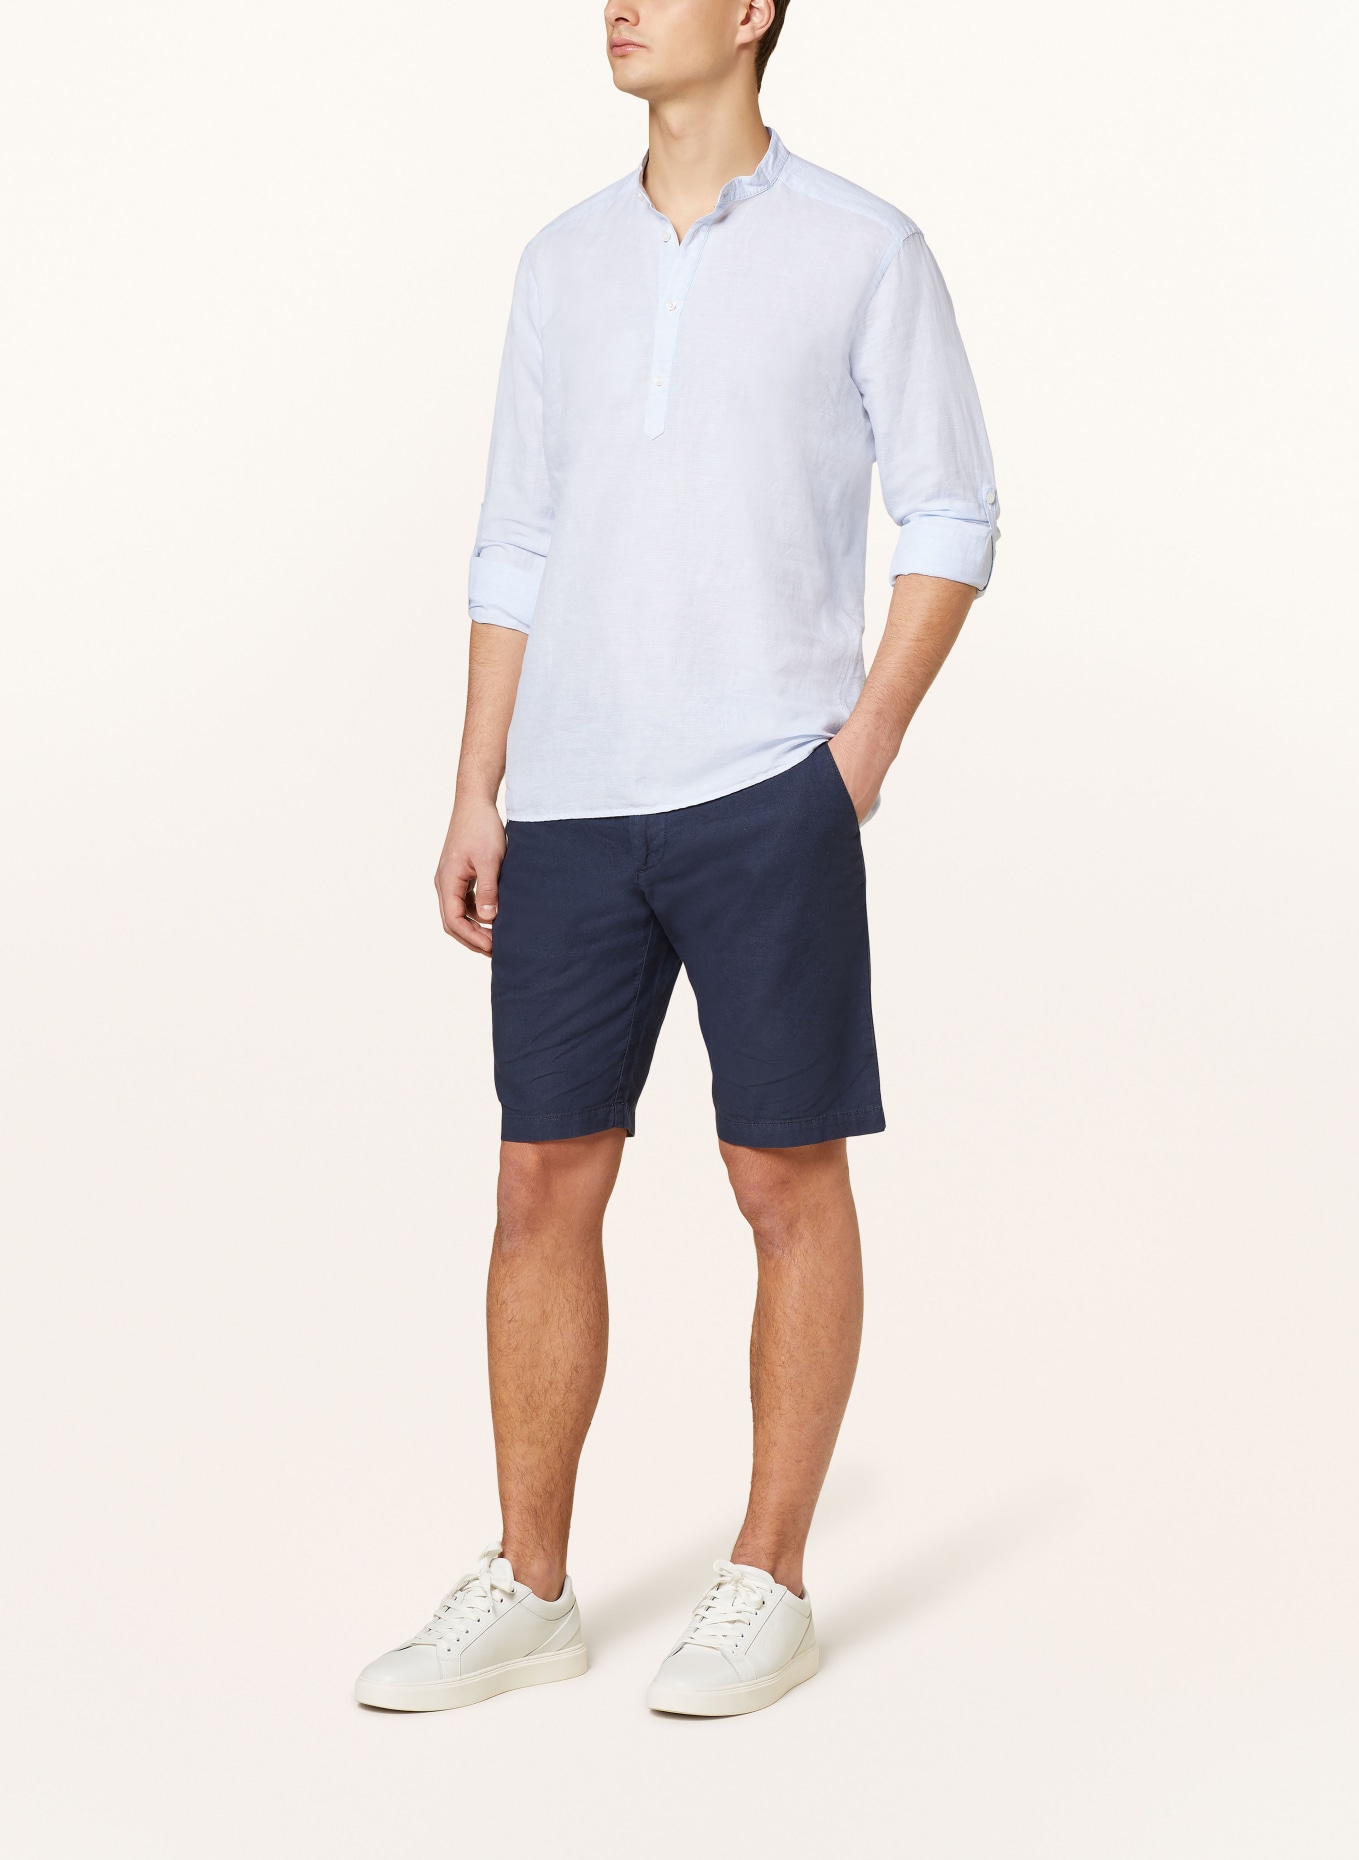 STROKESMAN'S Shirt regular fit with stand-up collar and linen, Color: LIGHT BLUE (Image 2)